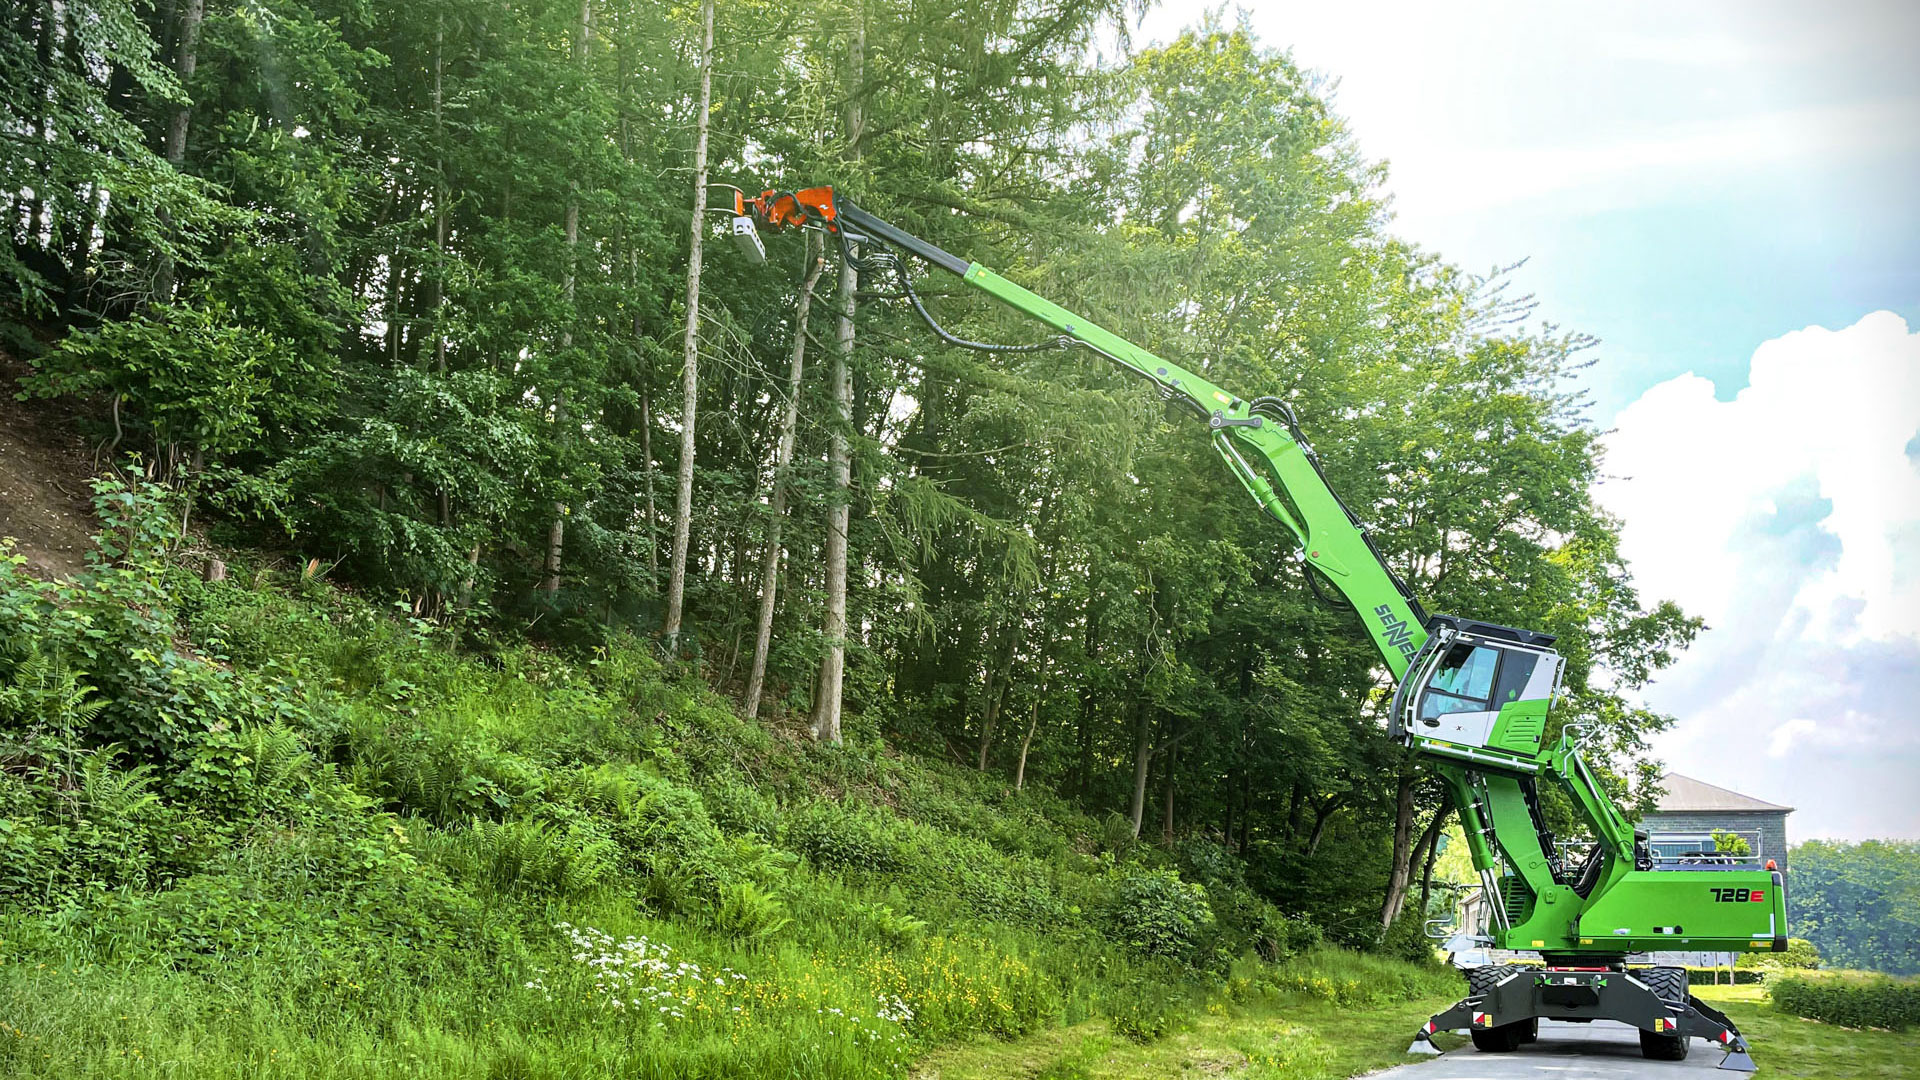 SENNEBOGEN's new 728 E reaches up, towards a tree, with its cab raised for better sightlines.